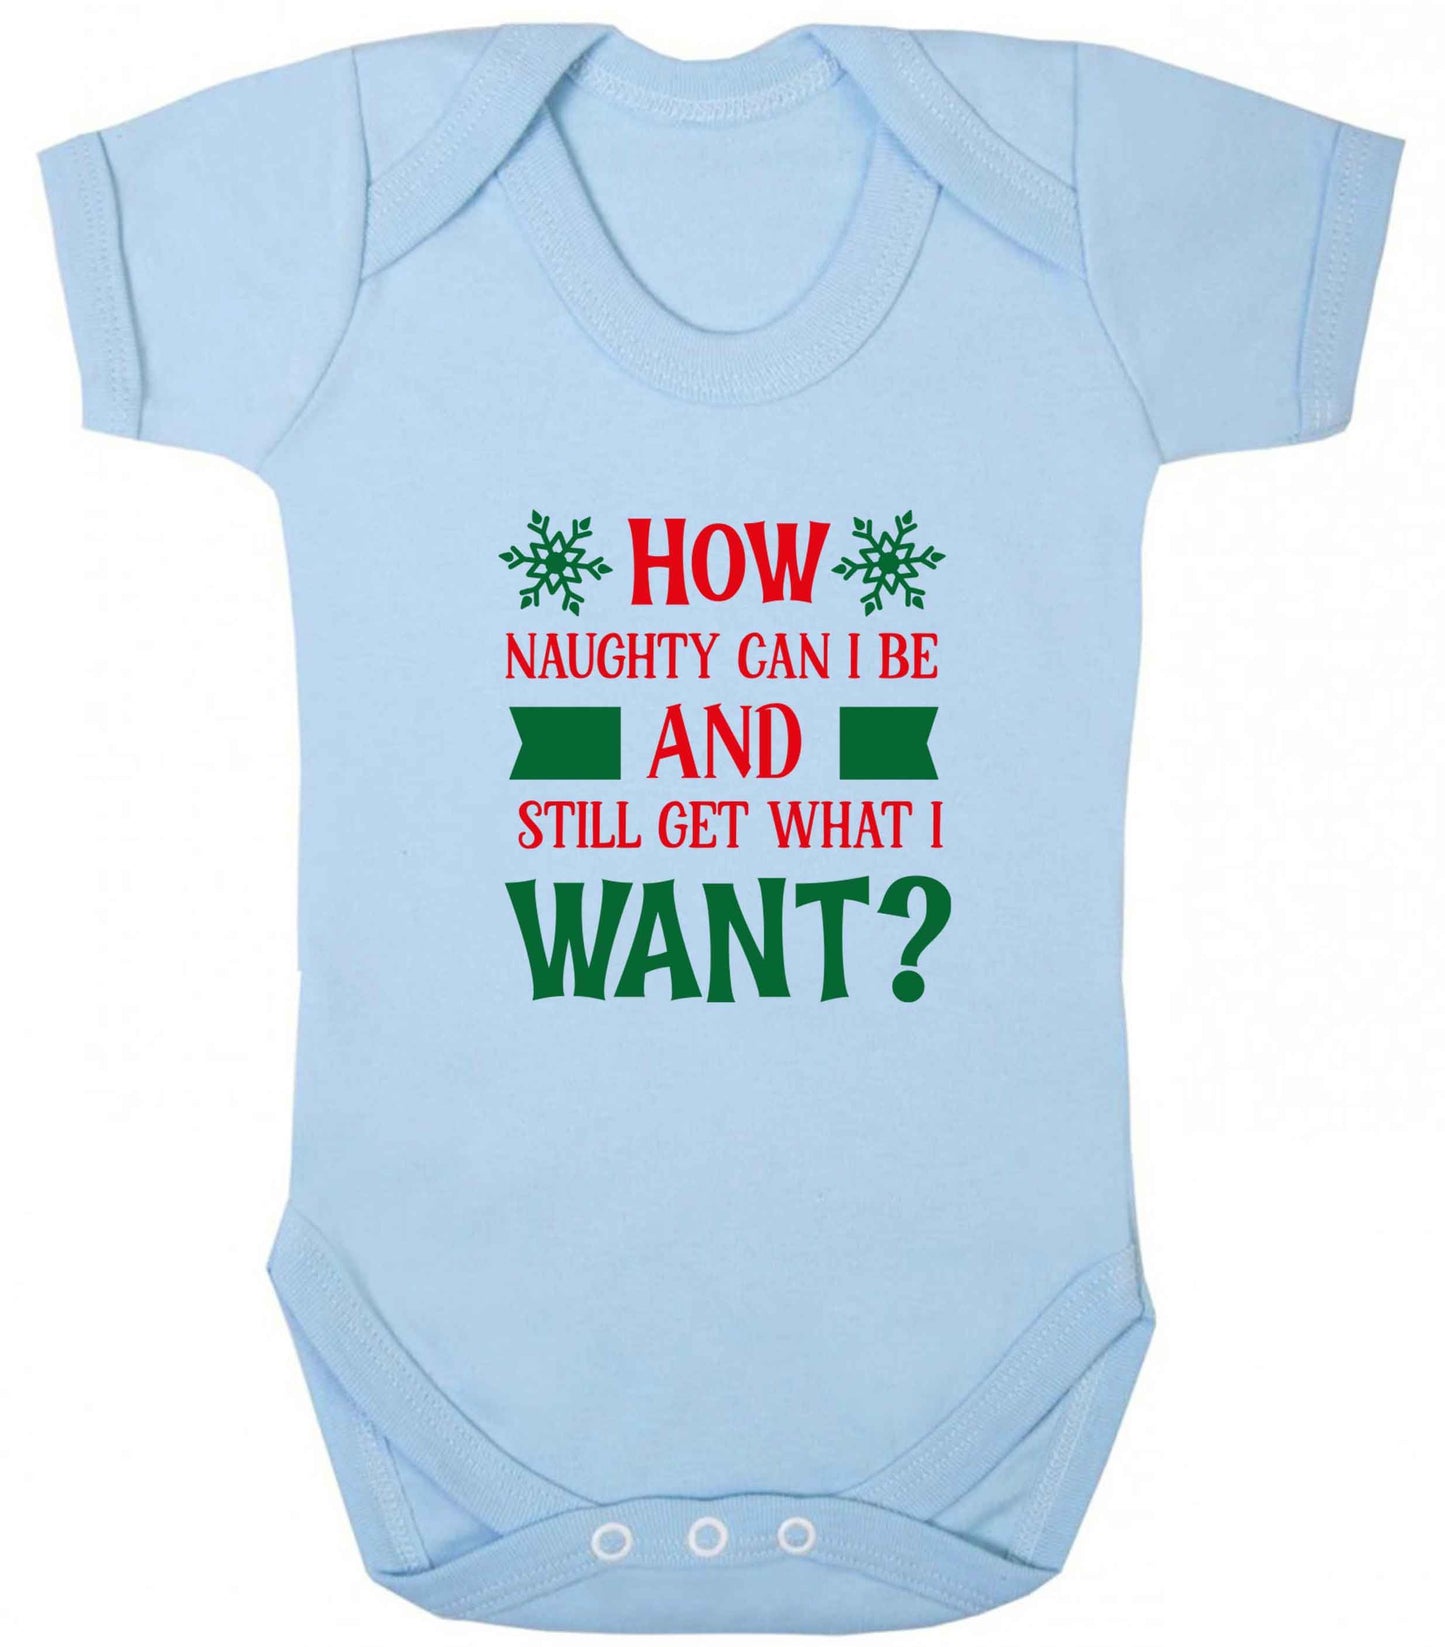 How naughty can I be and still get what I want? baby vest pale blue 18-24 months